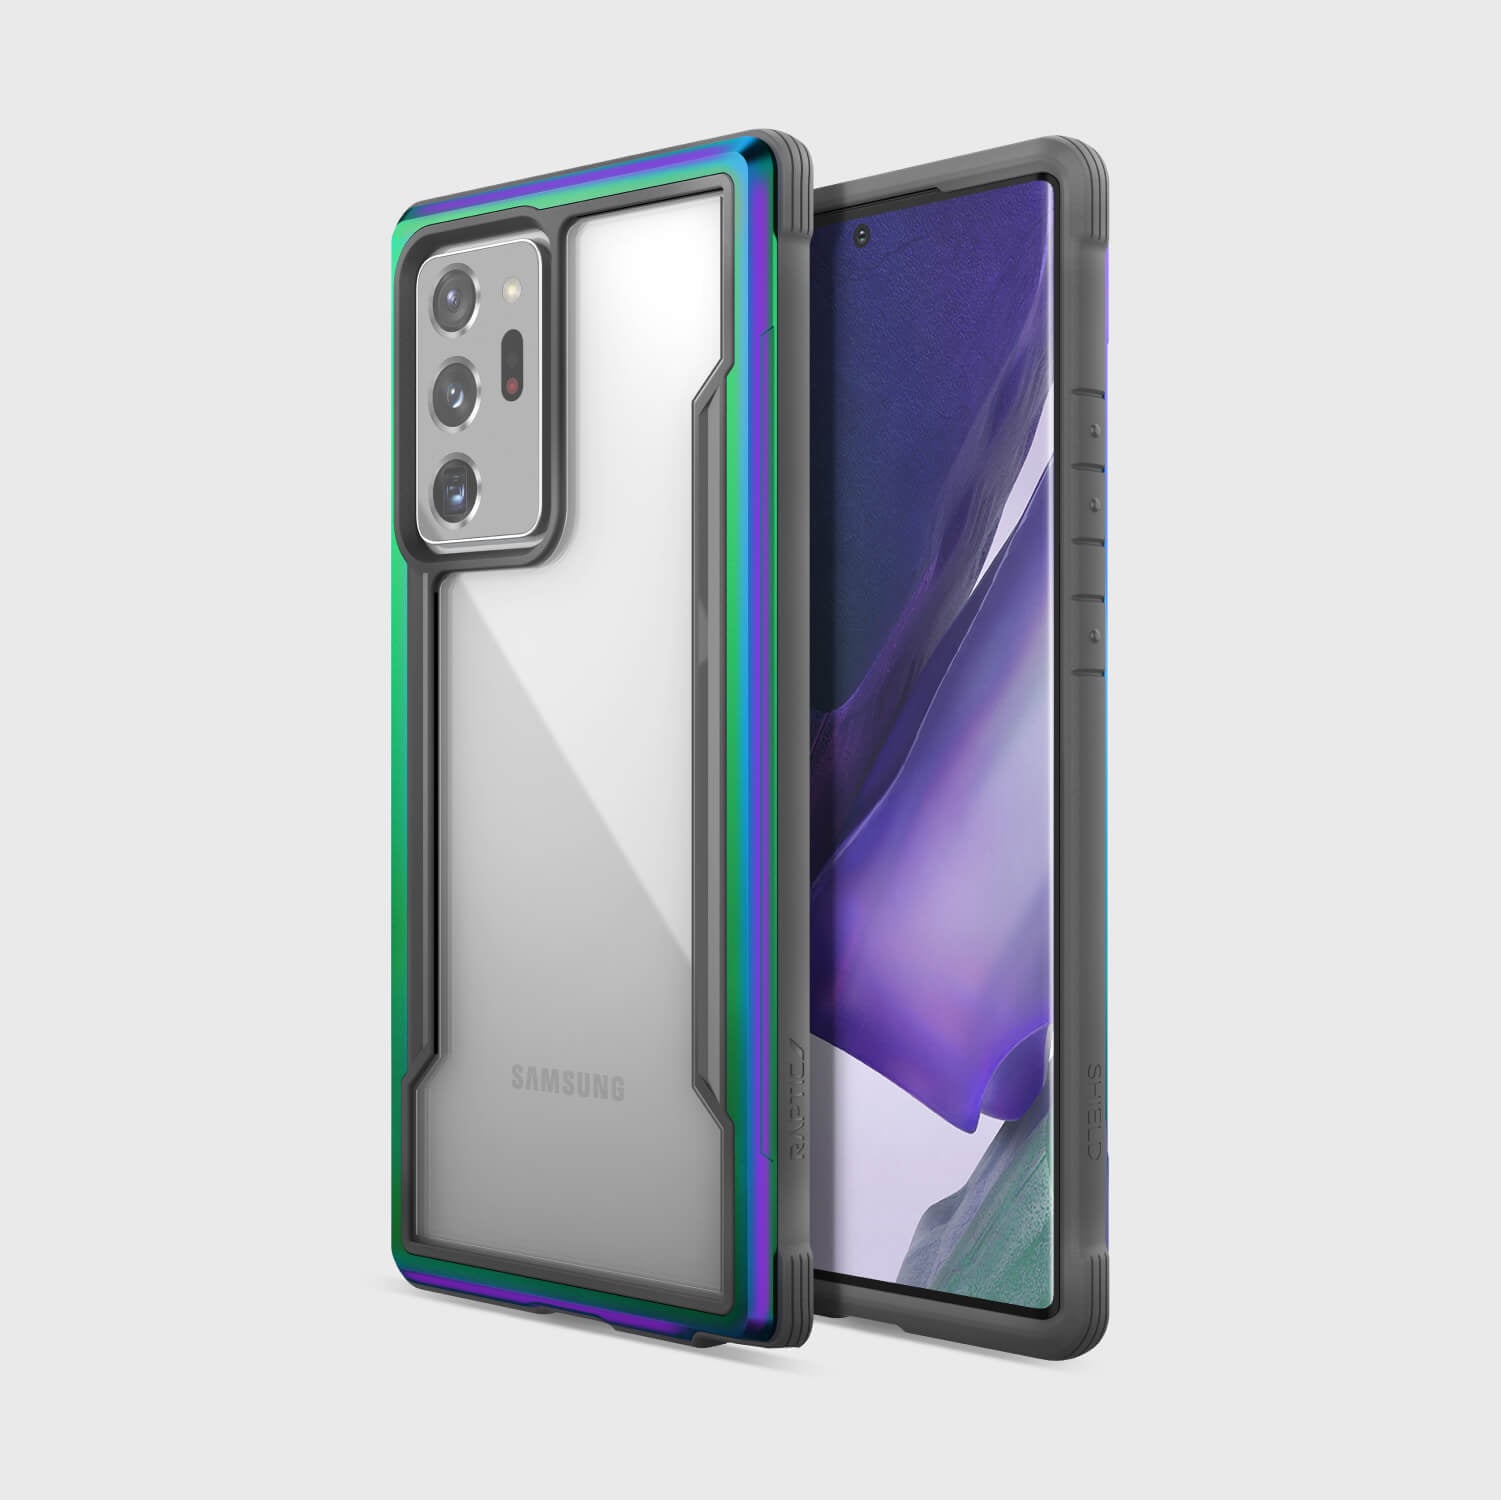 The X-Doria Galaxy Note 20 Ultra Raptic Shield case - Iridescent, known for its drop protection, is available in purple and green options.